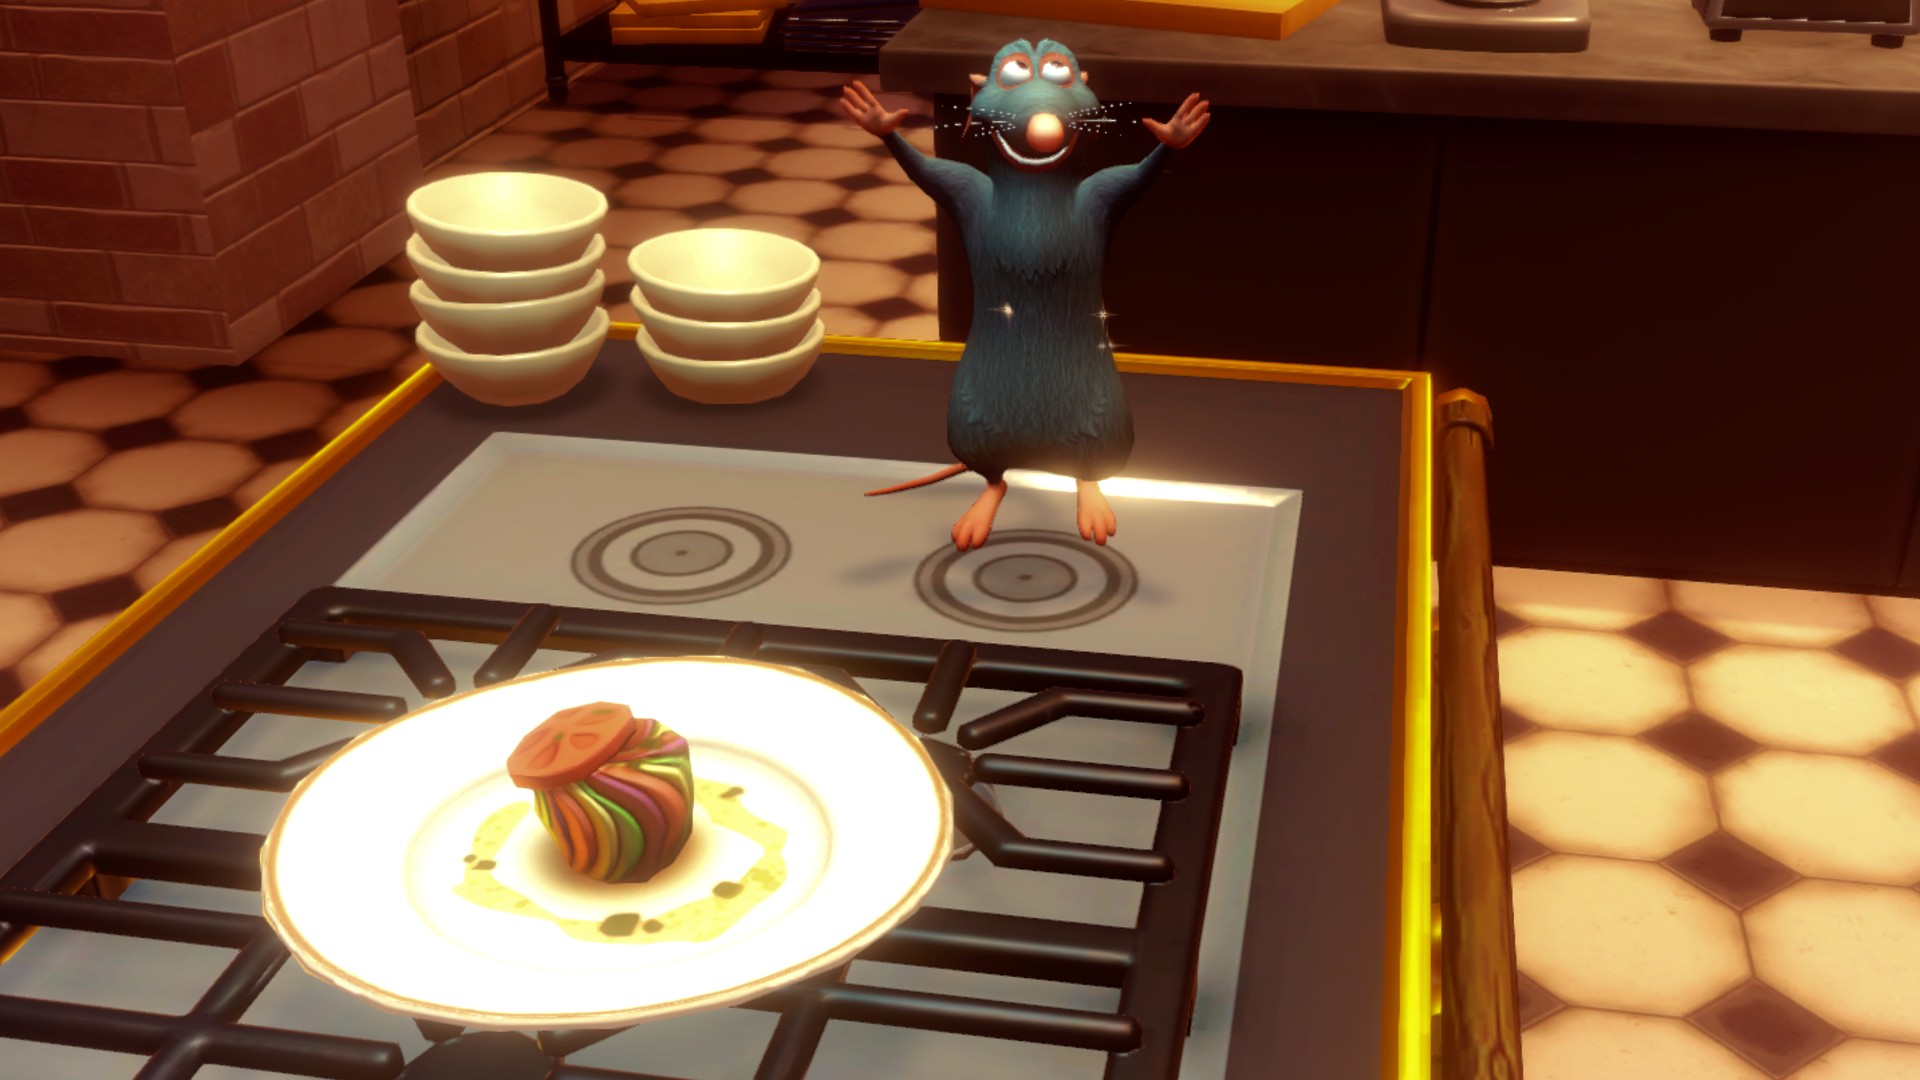 How to get the Disney Dreamlight Valley Ratatouille recipe